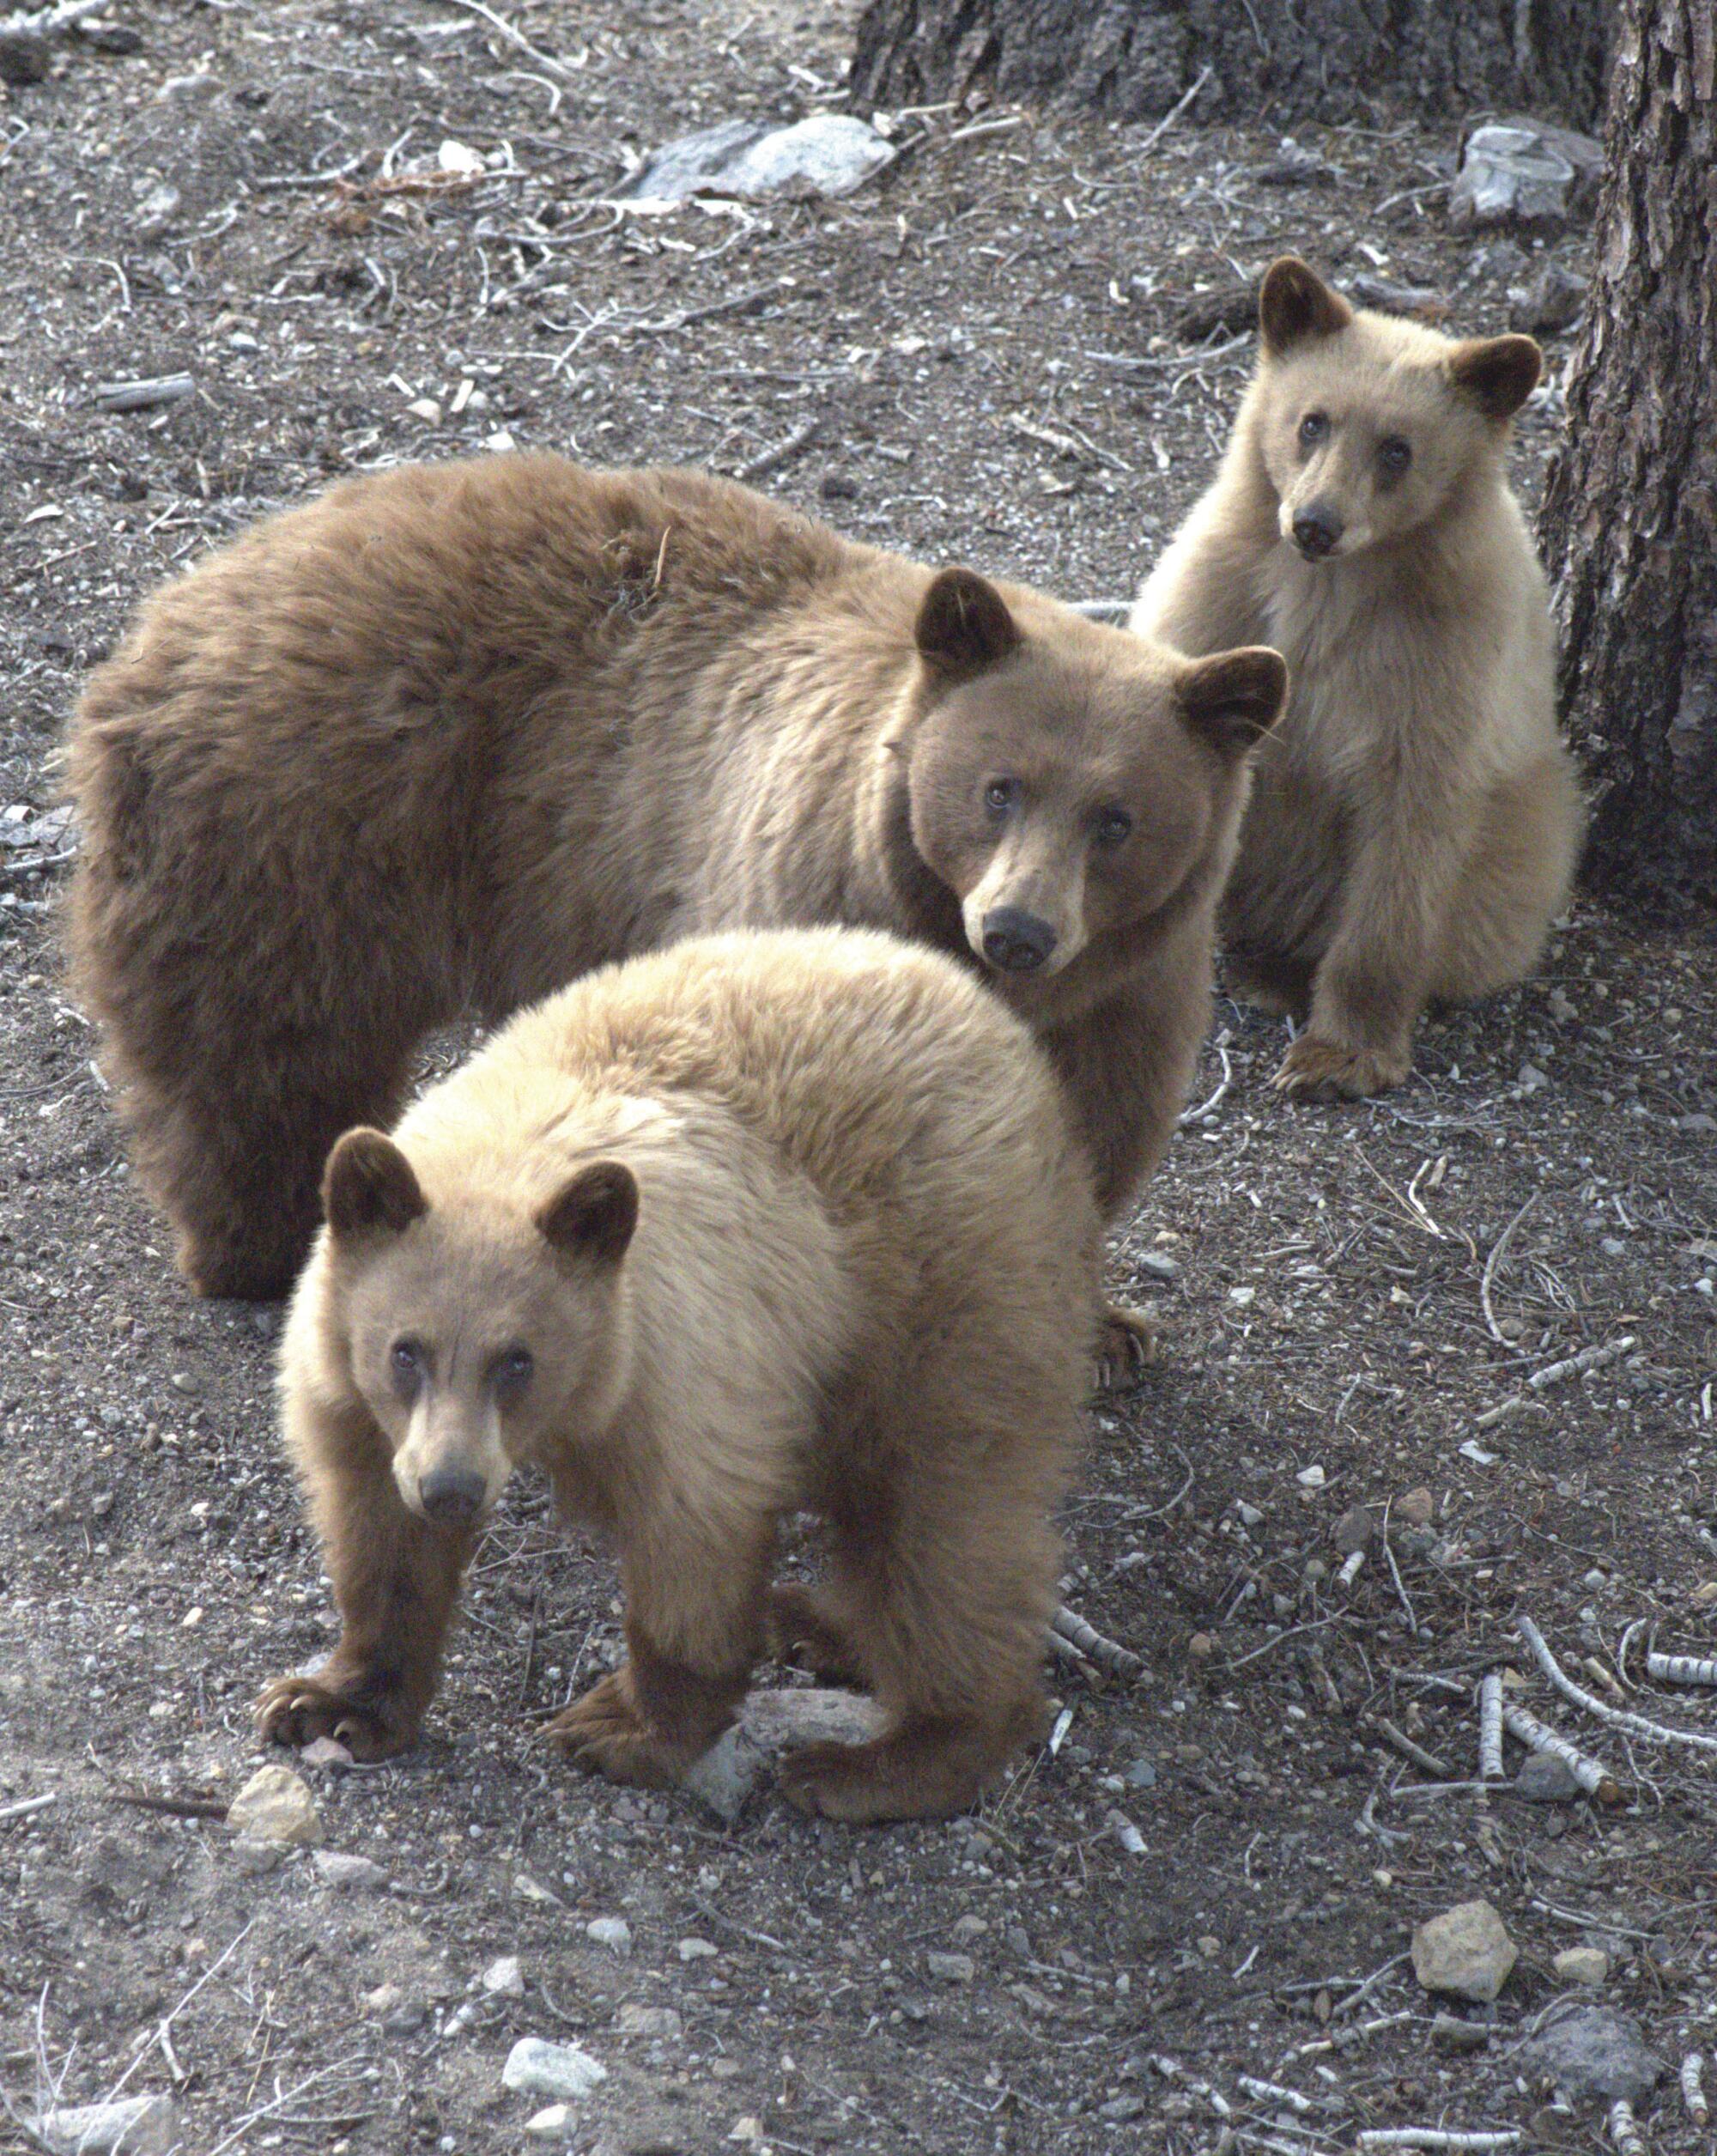 Three tan-colored bears sitting in the woods.